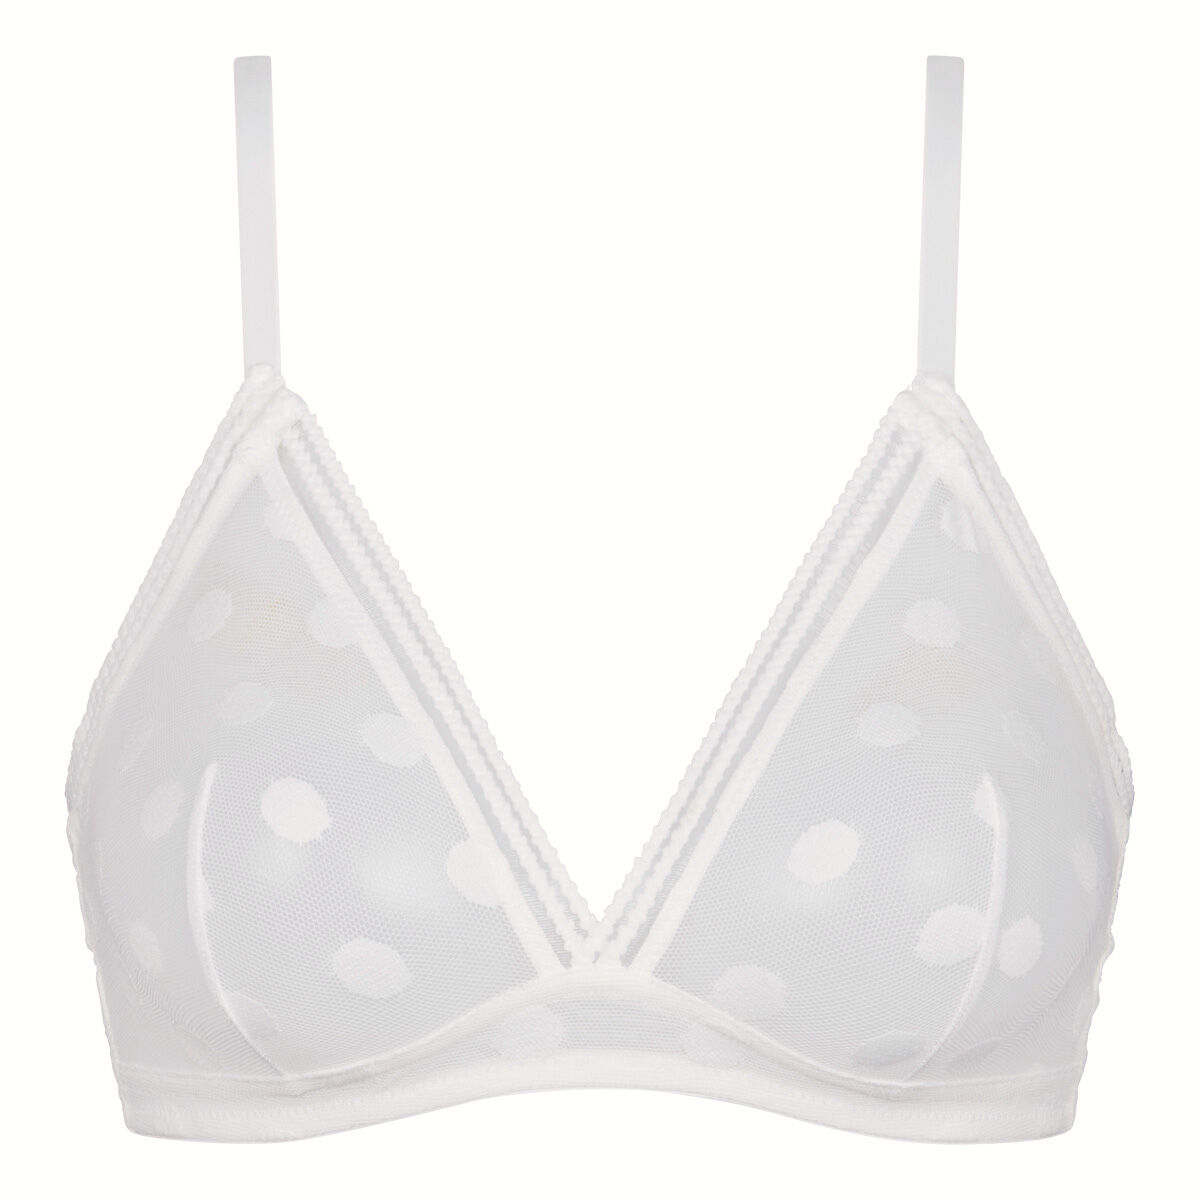 White Full Moon Triangle bra in transparent tulle with polka dots